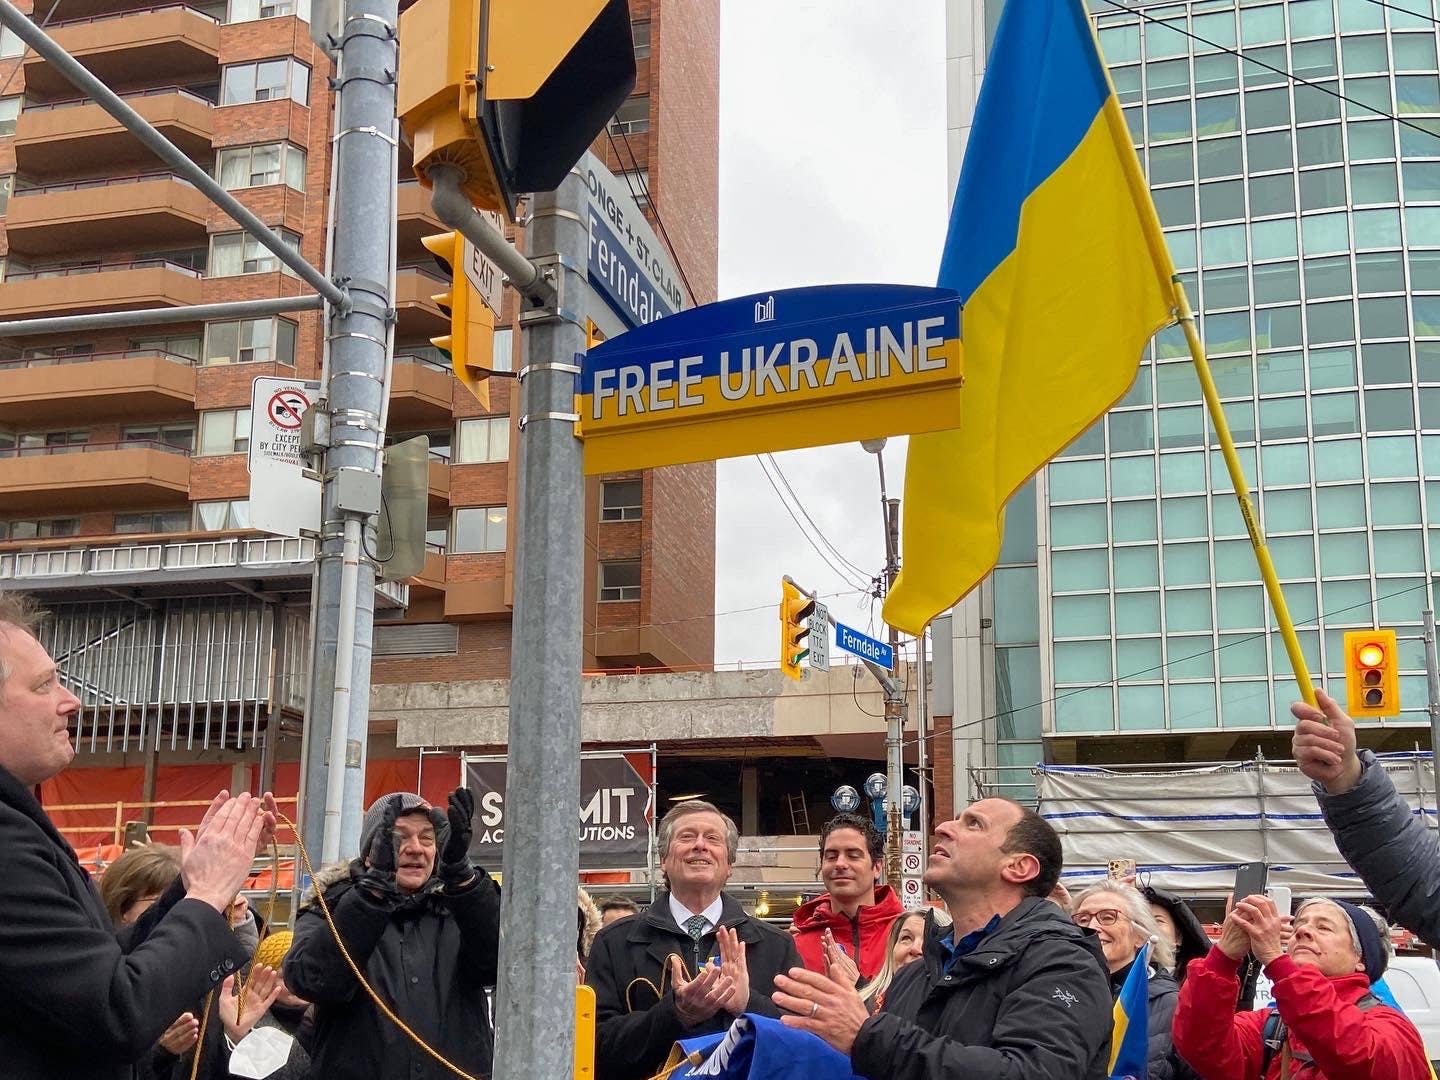 The unveiling of a blue and yellow "Free Ukraine" sign in Toronto, featuring Mayor john Tory among a crowd.